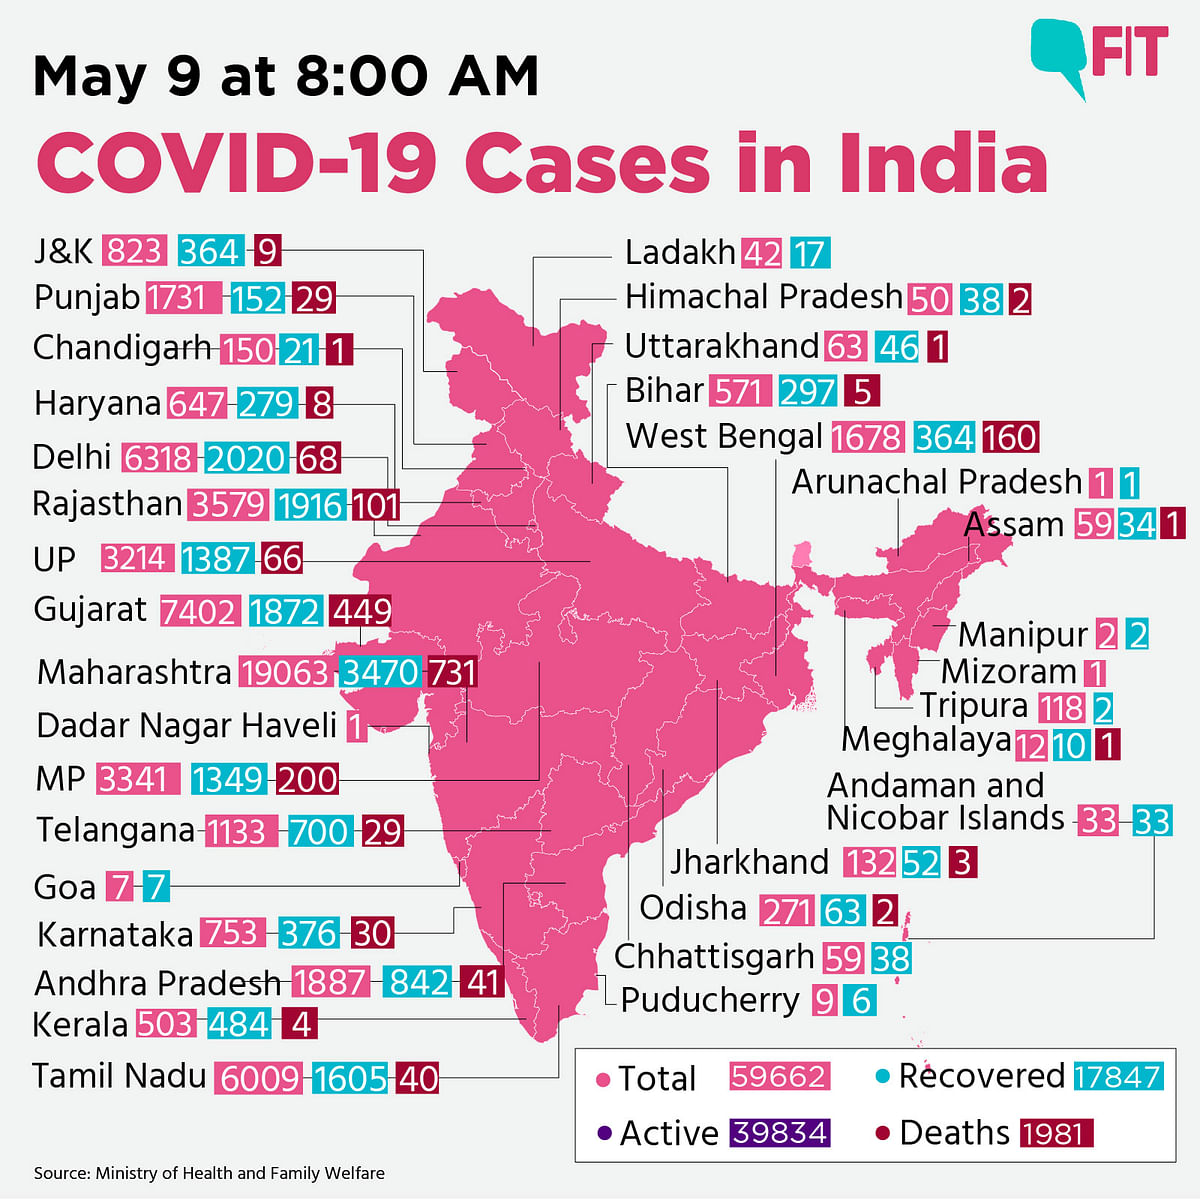 COVID-19 India Update: Cases Rise to 59,662, Death Toll at 1,981 